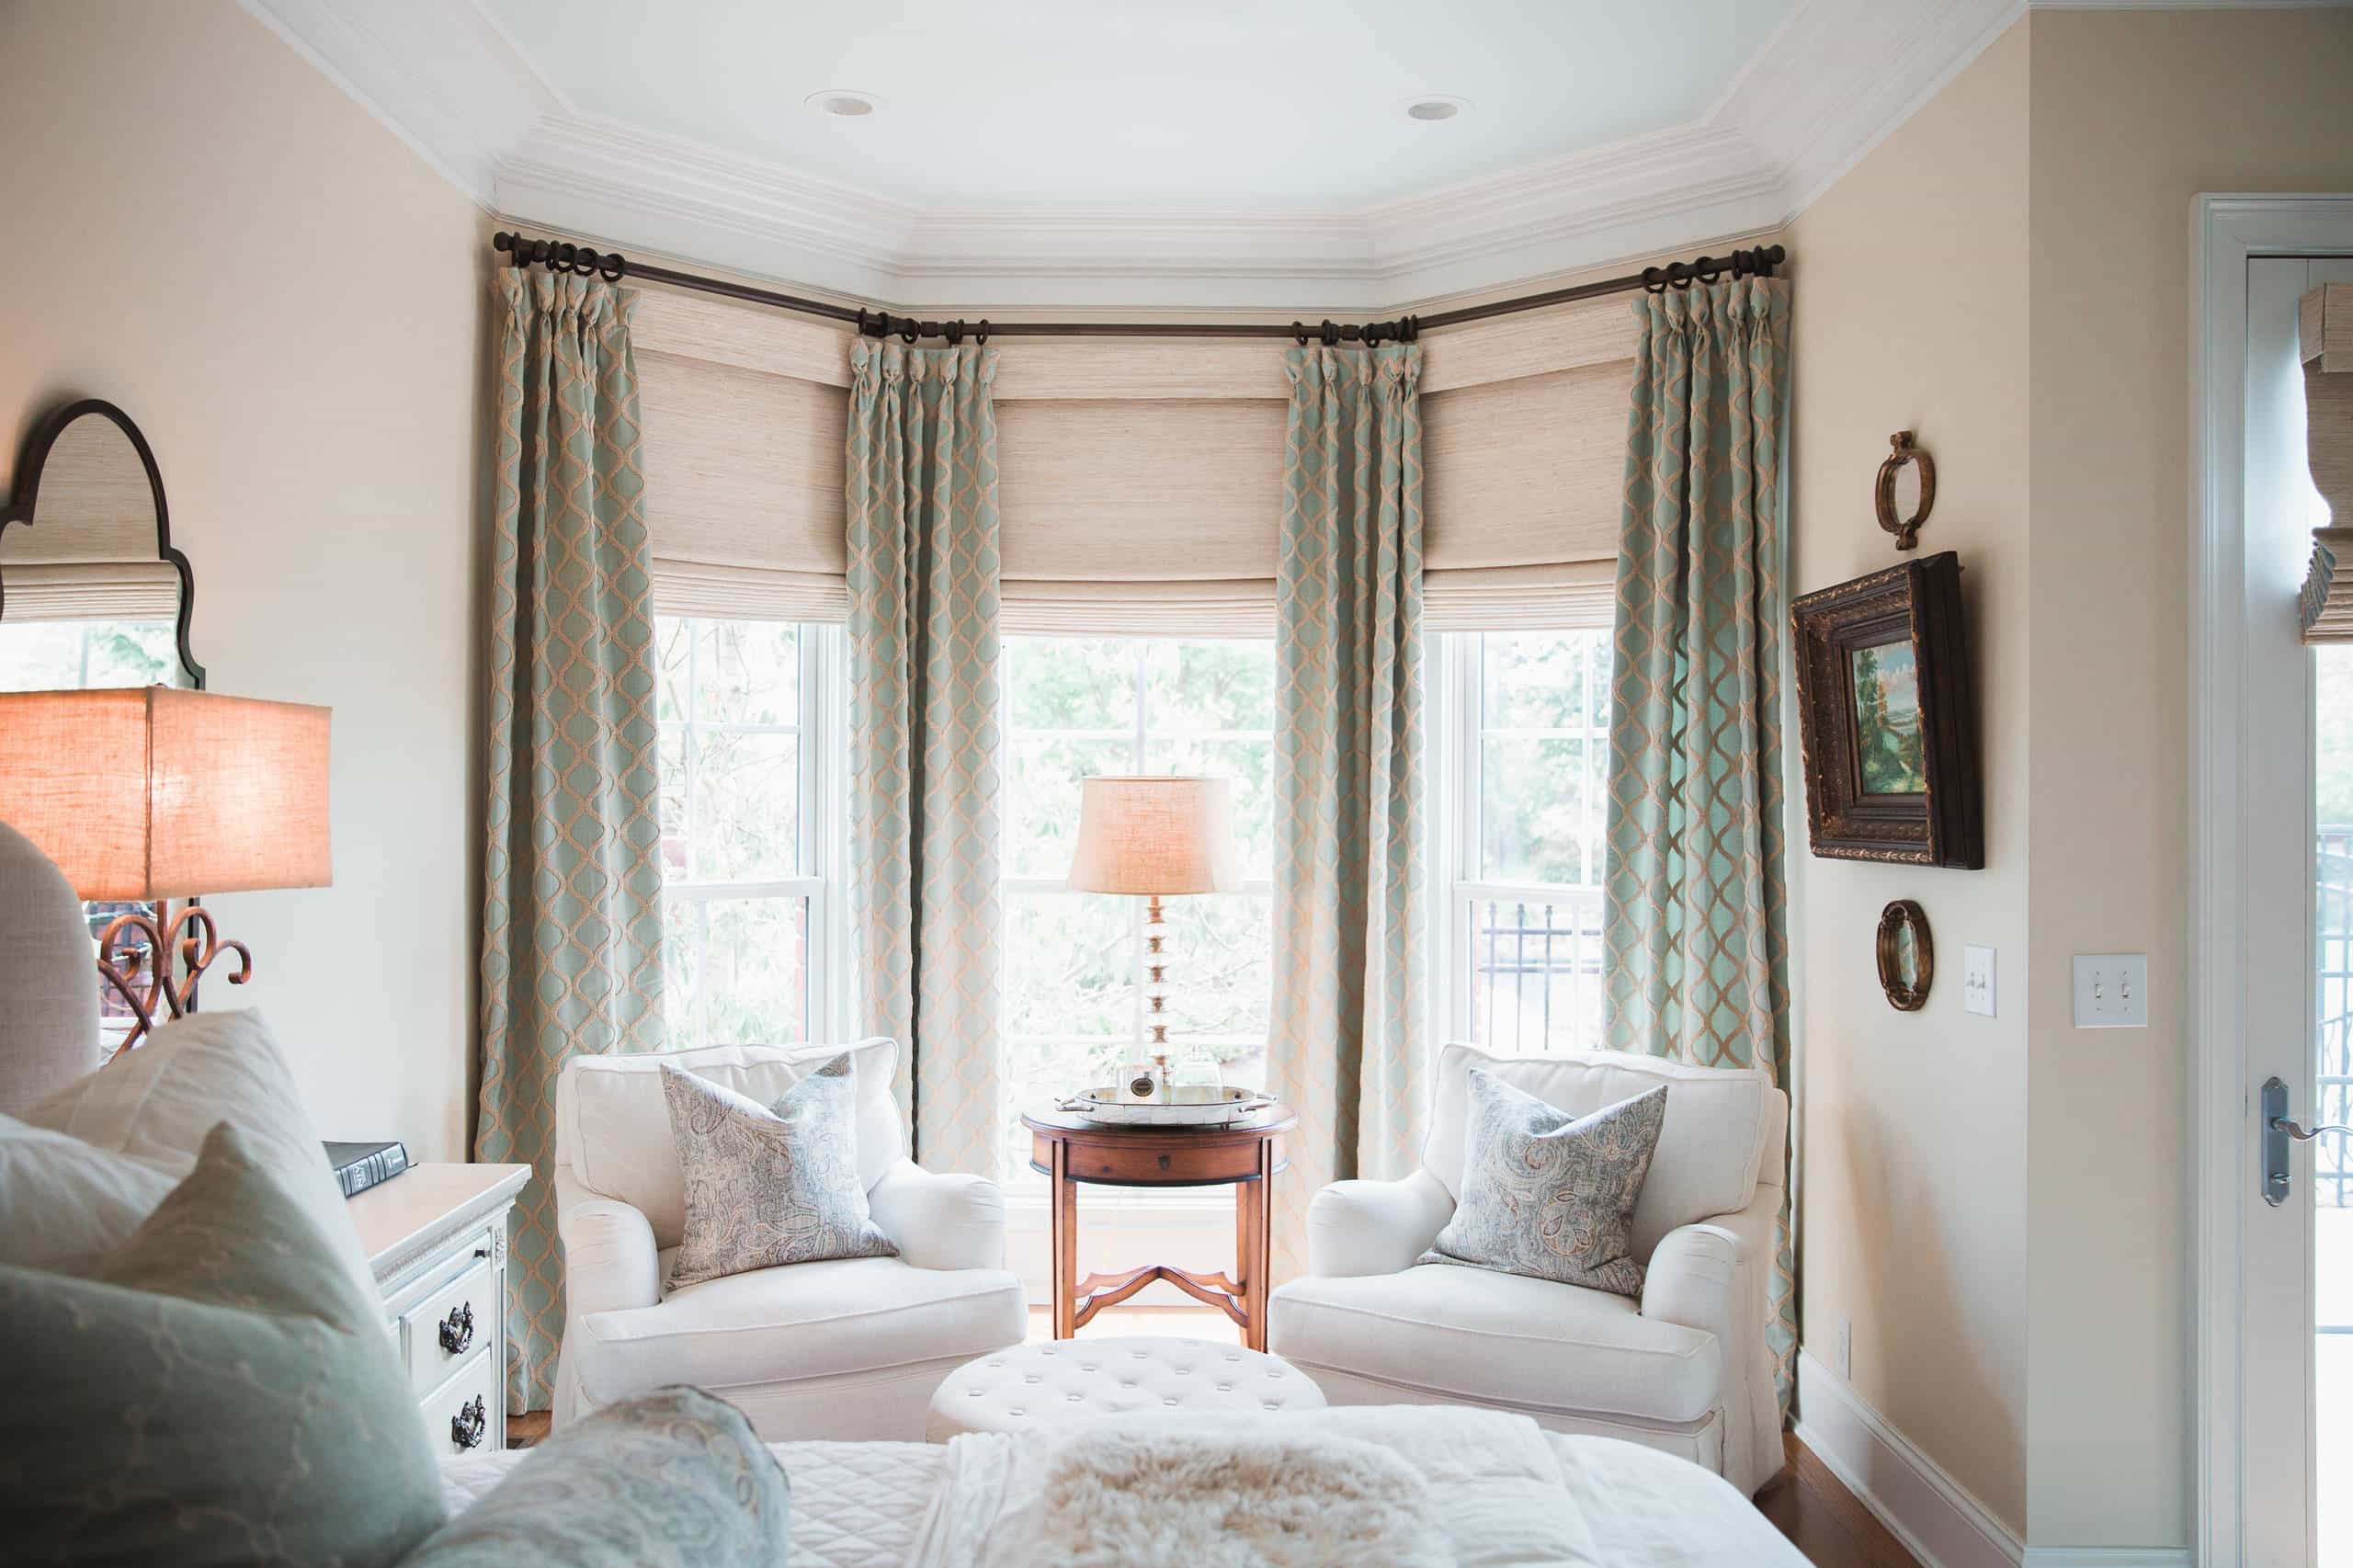 How To Put Drapes On A Bay Window